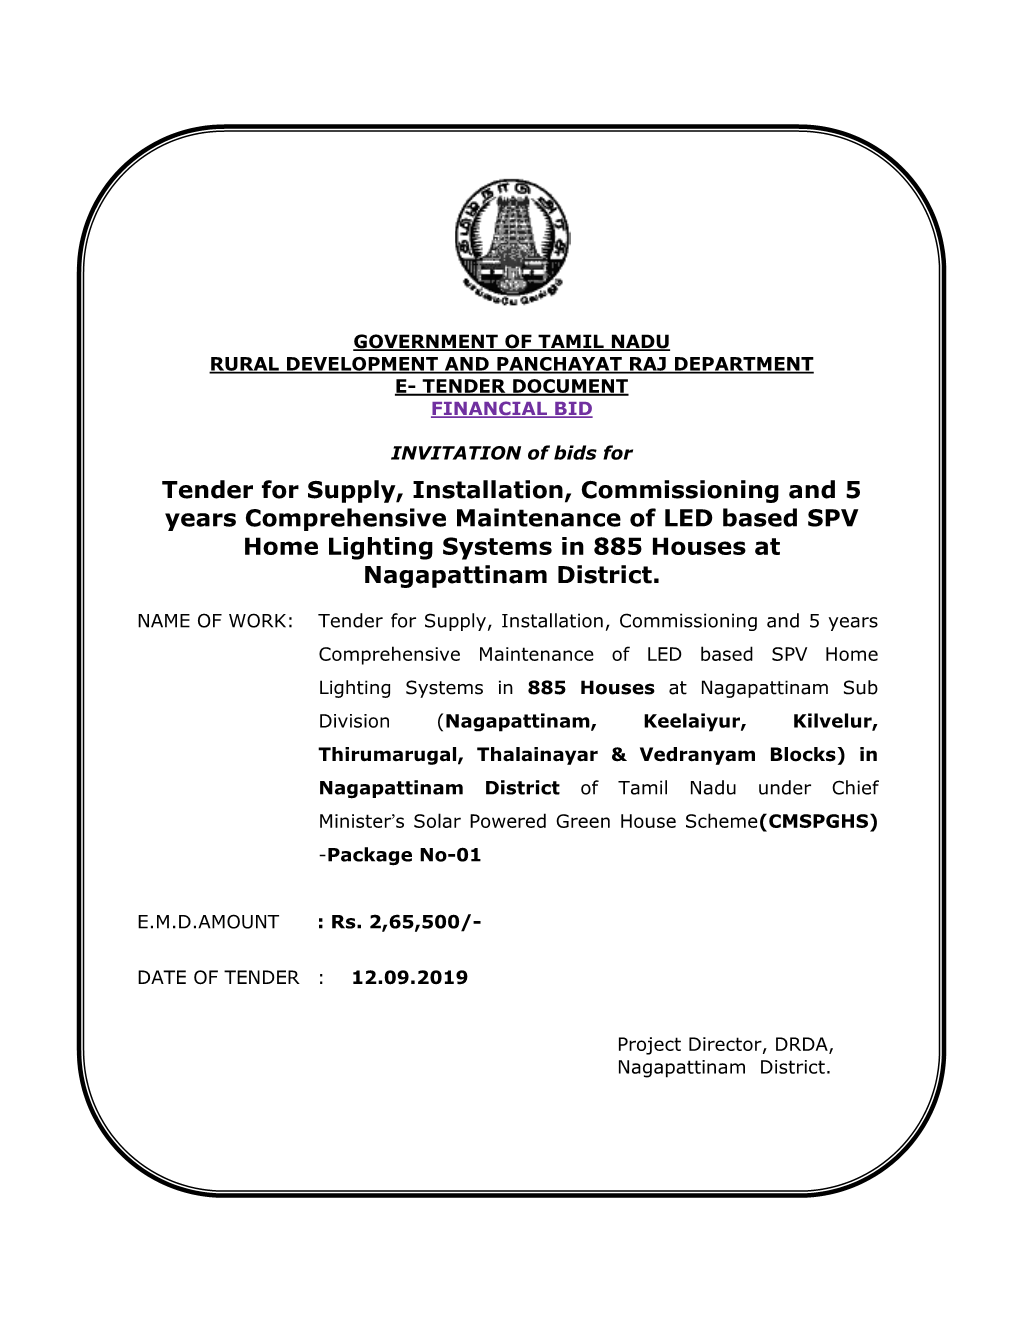 Tender for Supply, Installation, Commissioning and 5 Years Comprehensive Maintenance of LED Based SPV Home Lighting Systems in 885 Houses at Nagapattinam District